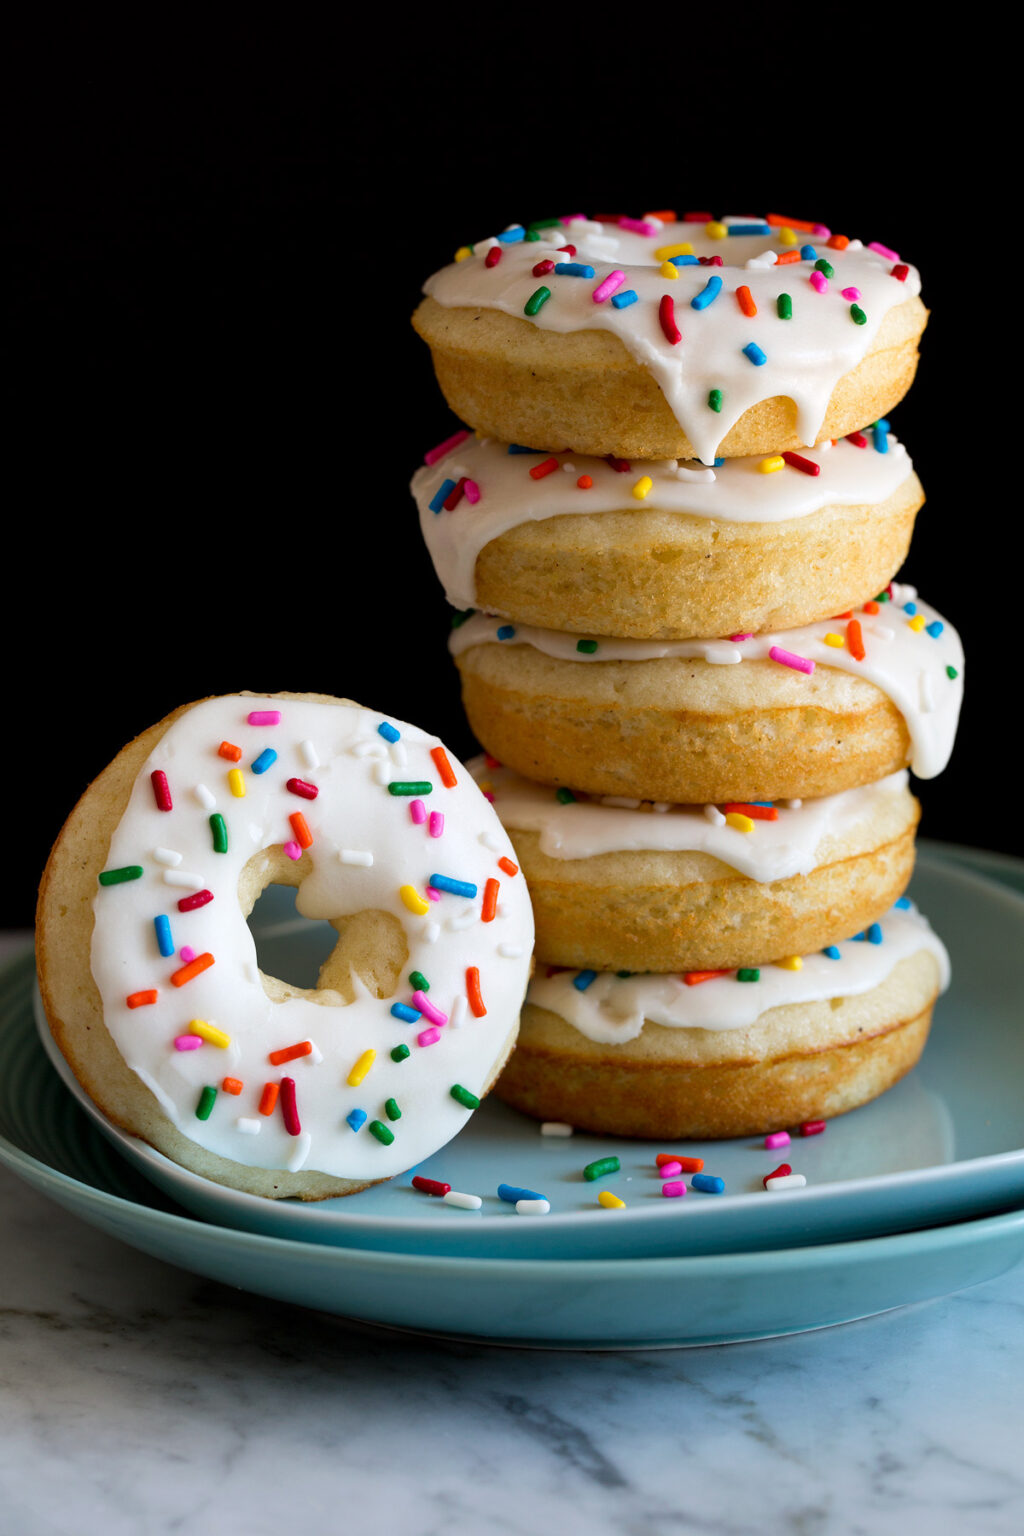 Baked Donut Recipe - Cooking Classy